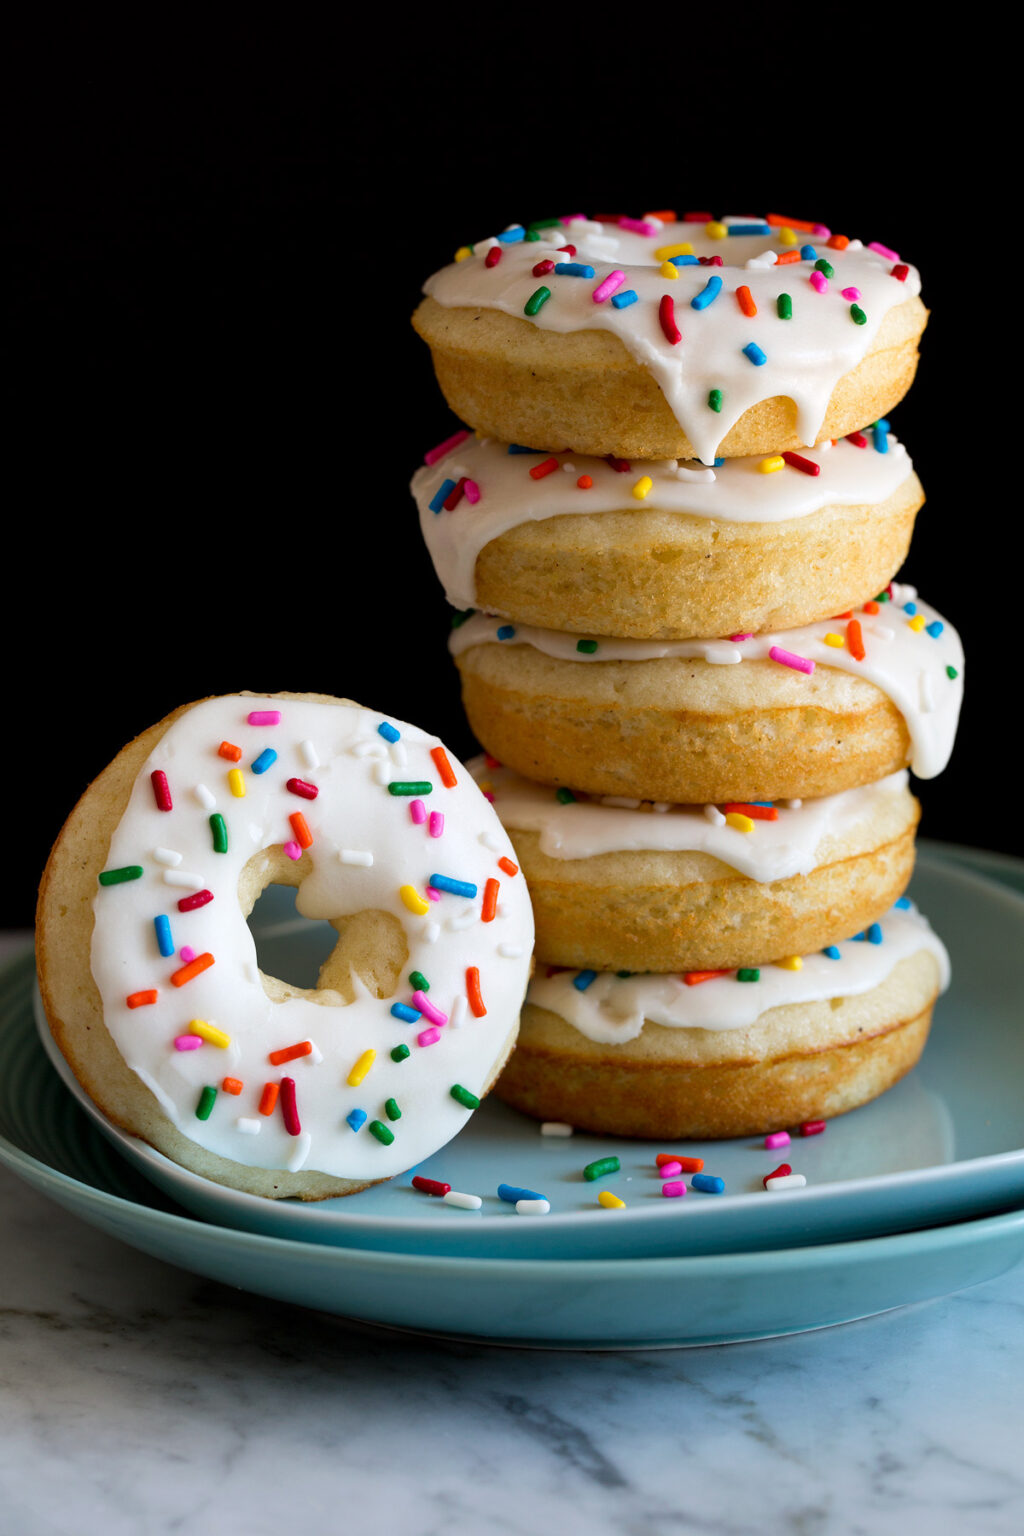 Baked Donut Recipe - Cooking Classy